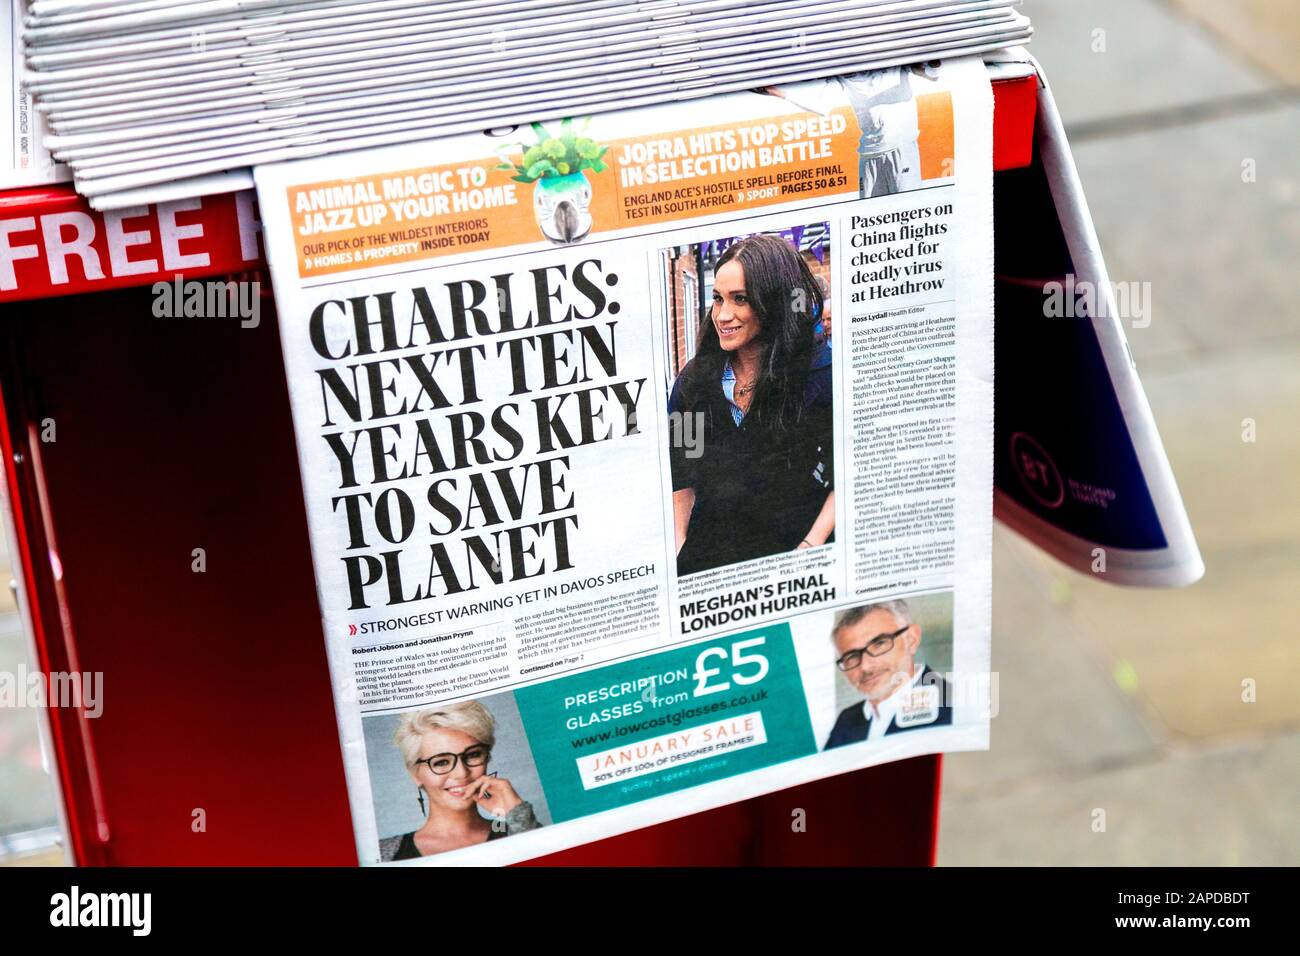 22nd January 2020, London, UK - Front page of the Evening Standard with headline 'Charles: Next Ten Years Key to Save Planet' Stock Photo